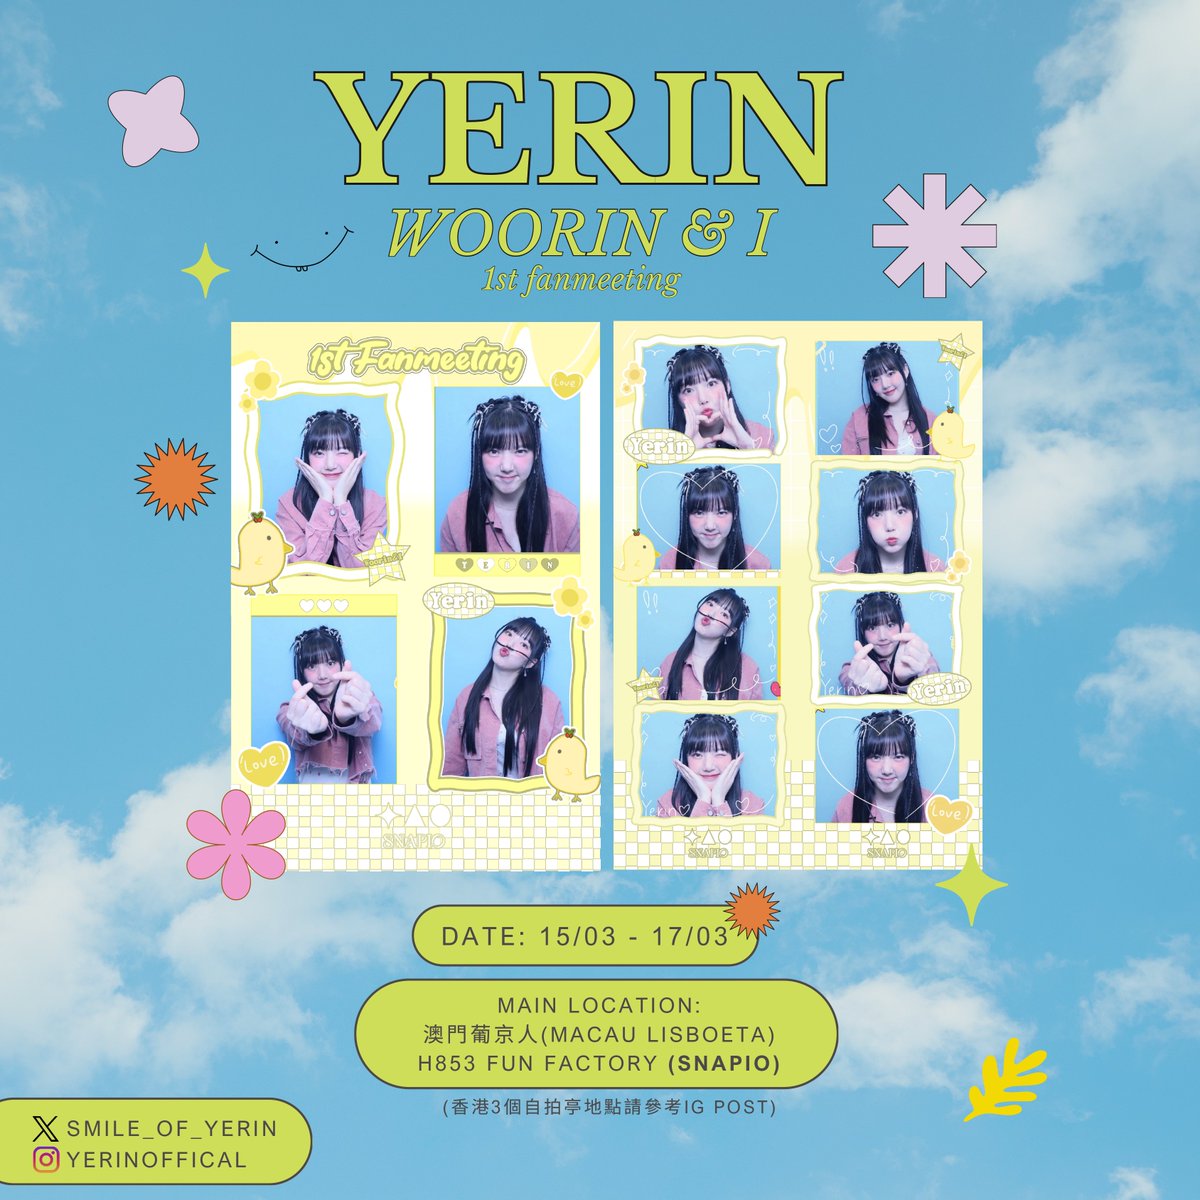 Greetings! I'm @smile_of_yerin To celebrate Yerin's first FM in Macau, I have prepared a photo booth event with special frames to commemorate! #예린 Please take proof shots if you did ! ～ ♪( ´▽｀) 📍Location: Macau Lisboeta H853 Fun Factory SNAPIO BOOTH 📆Date: 15/3-17/3